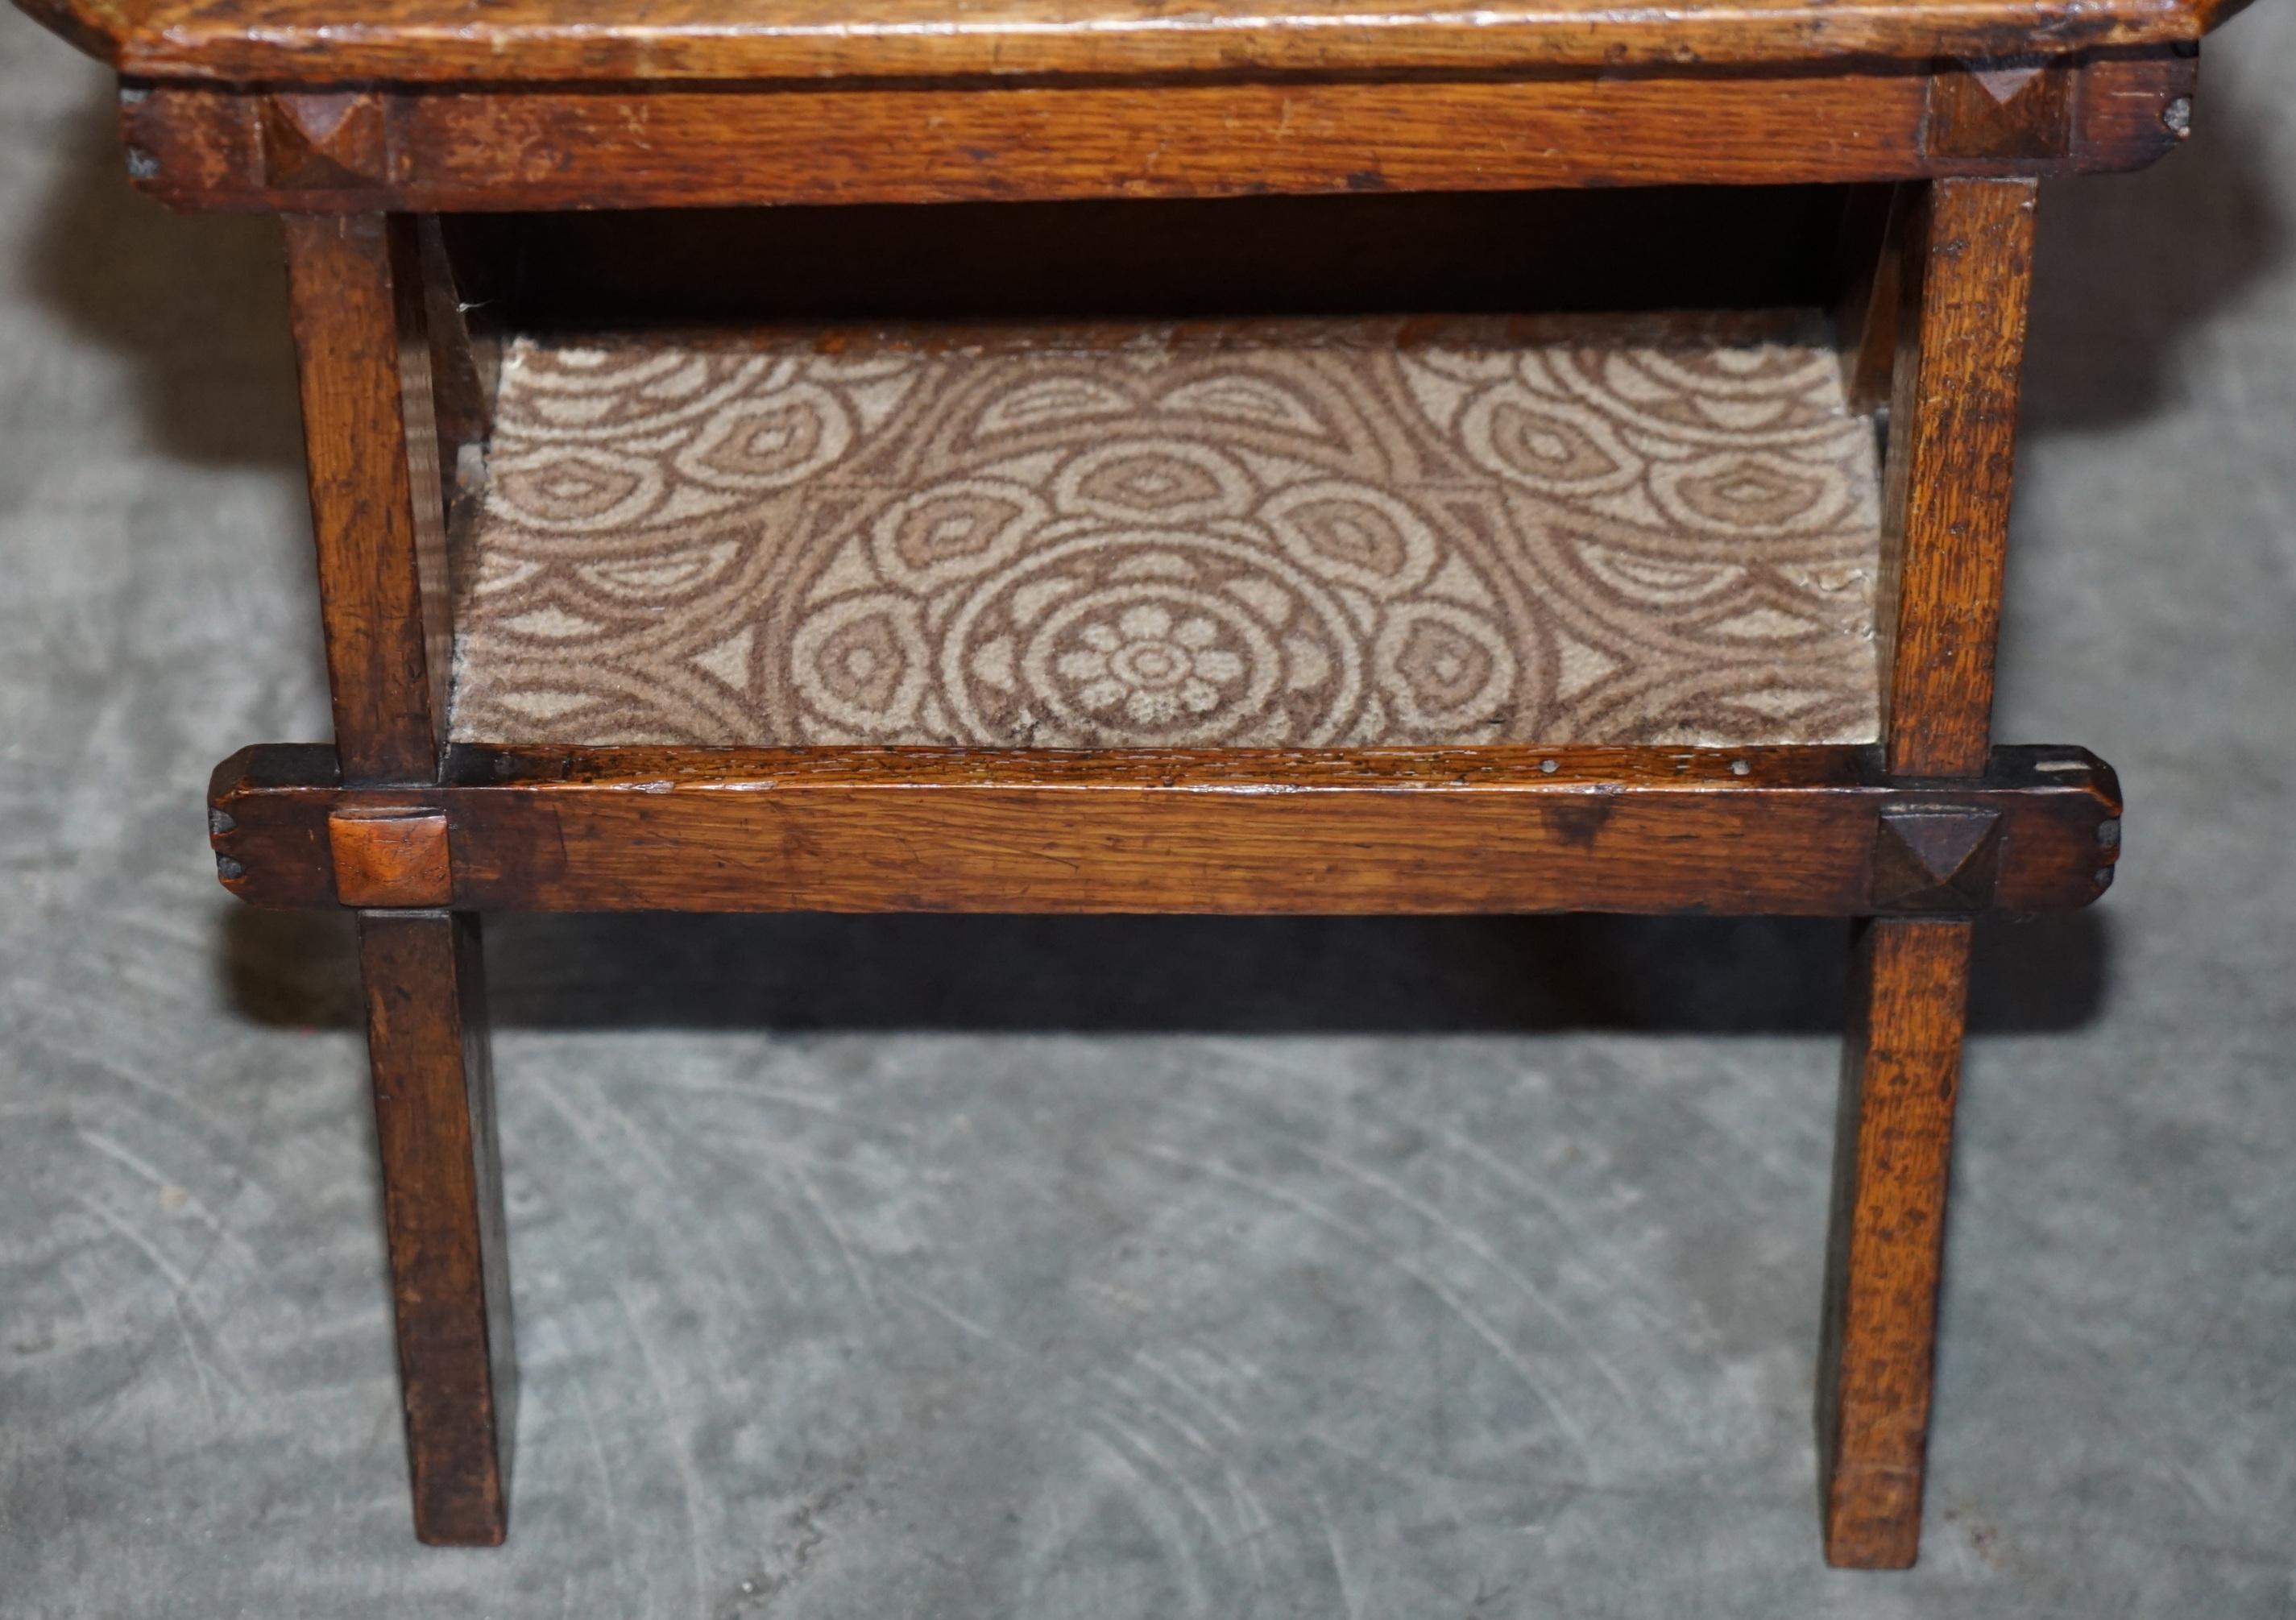 Antique Arts & Crafts Metamorphic Library Steps William Morris Carpet Upholstery For Sale 1